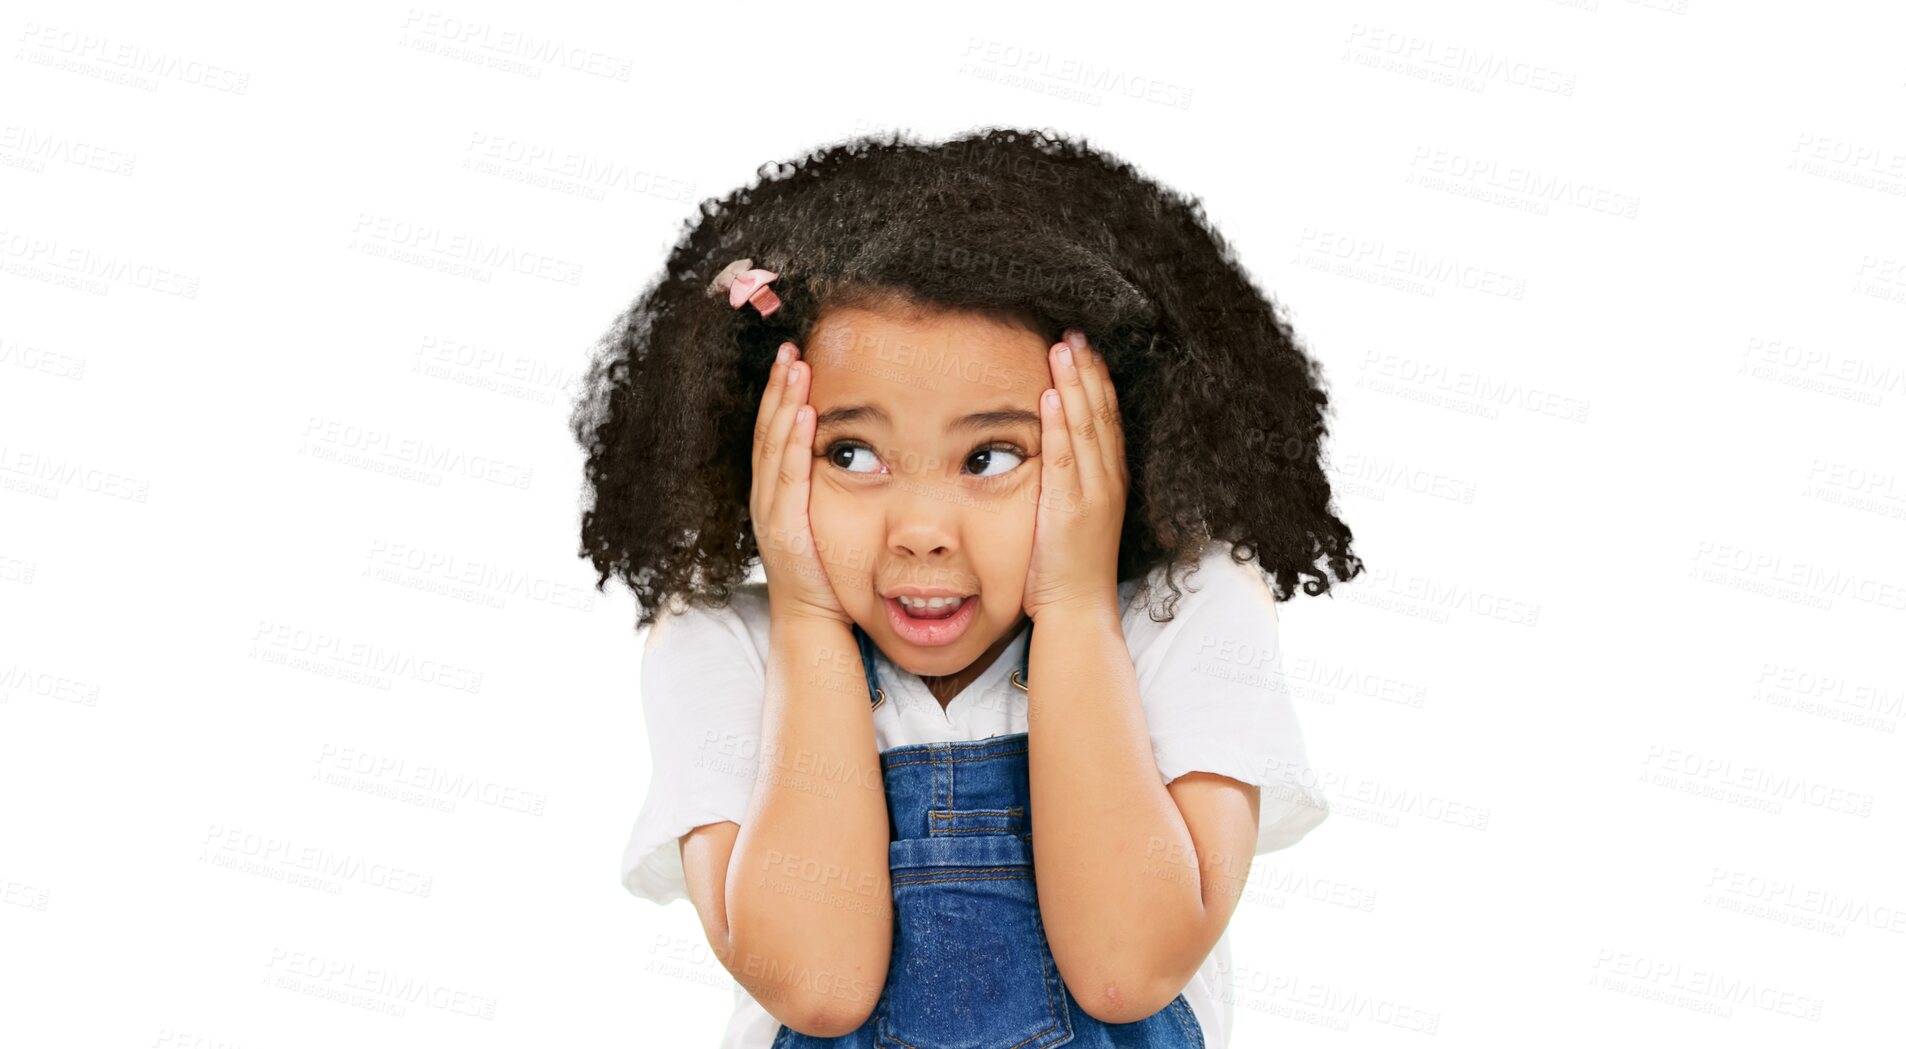 Buy stock photo Fear, worried and mistake of little girl with hands on face isolated on a transparent PNG background. Nervous, anxious or scared kid or child in panic, stress or looking afraid with facial expression